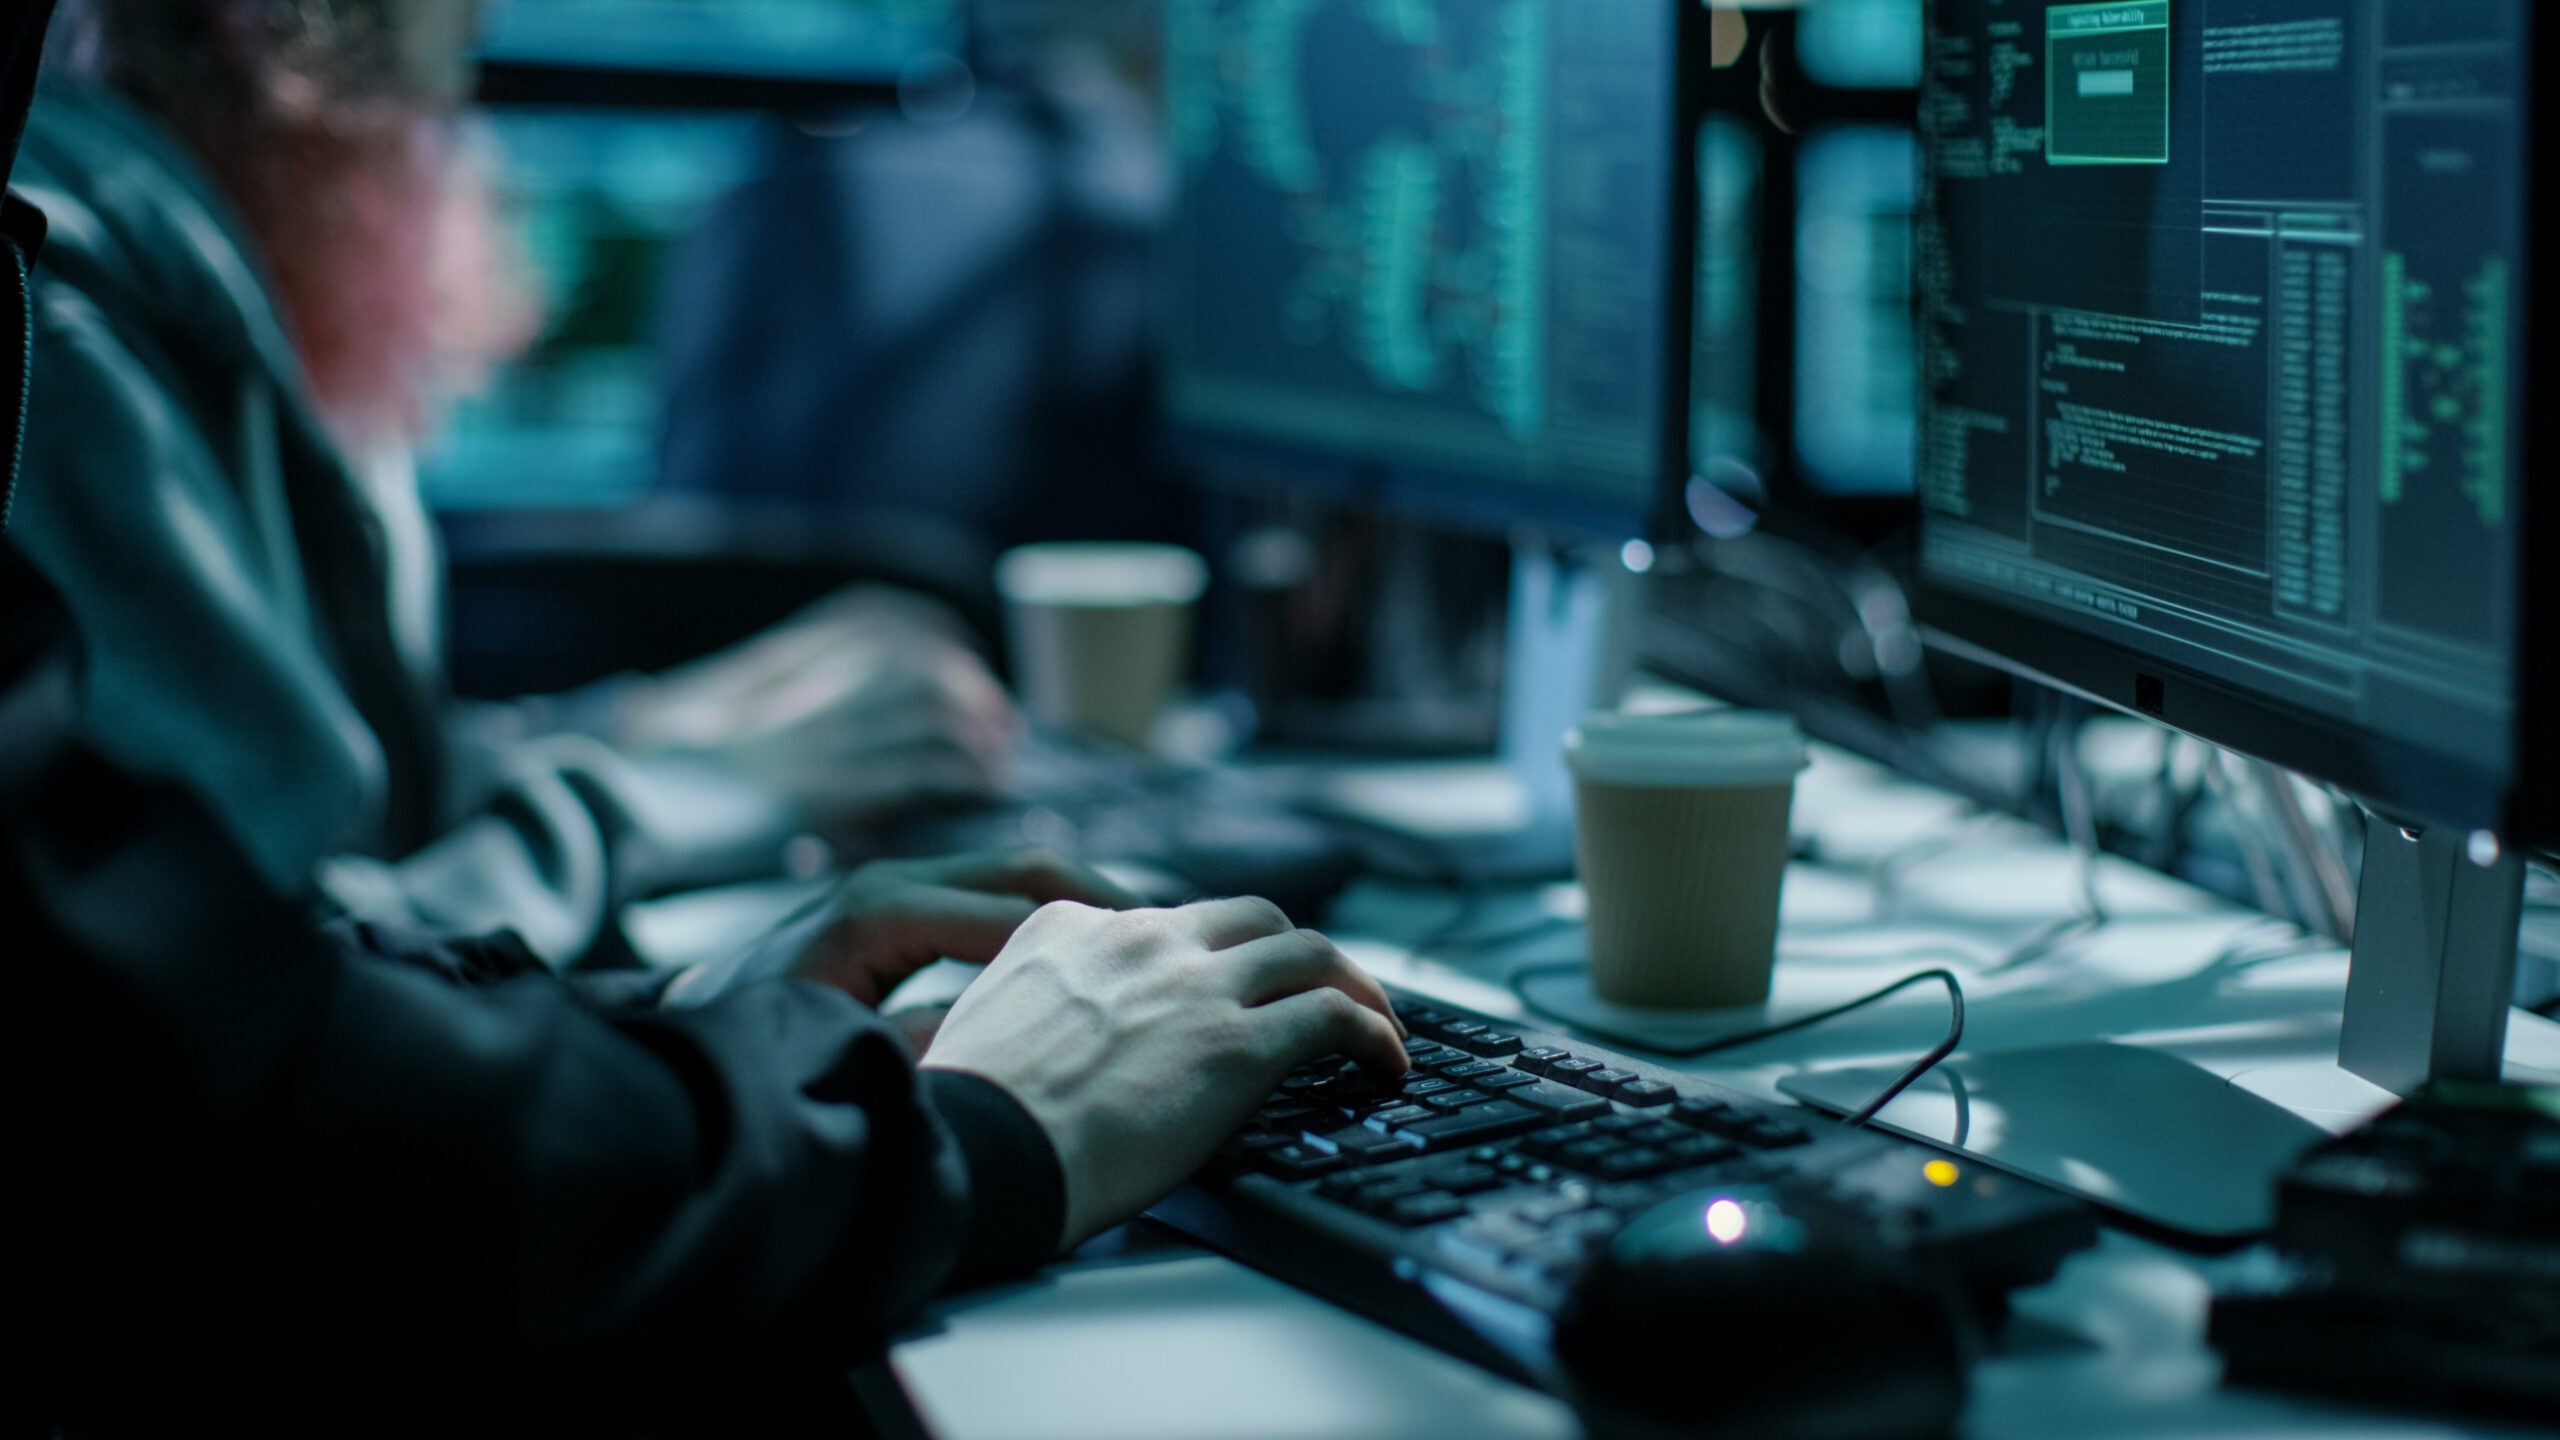 Close-up Shot of Hacker using Keyboard. There is Coffee Cups and Computer Monitors with Various Information.